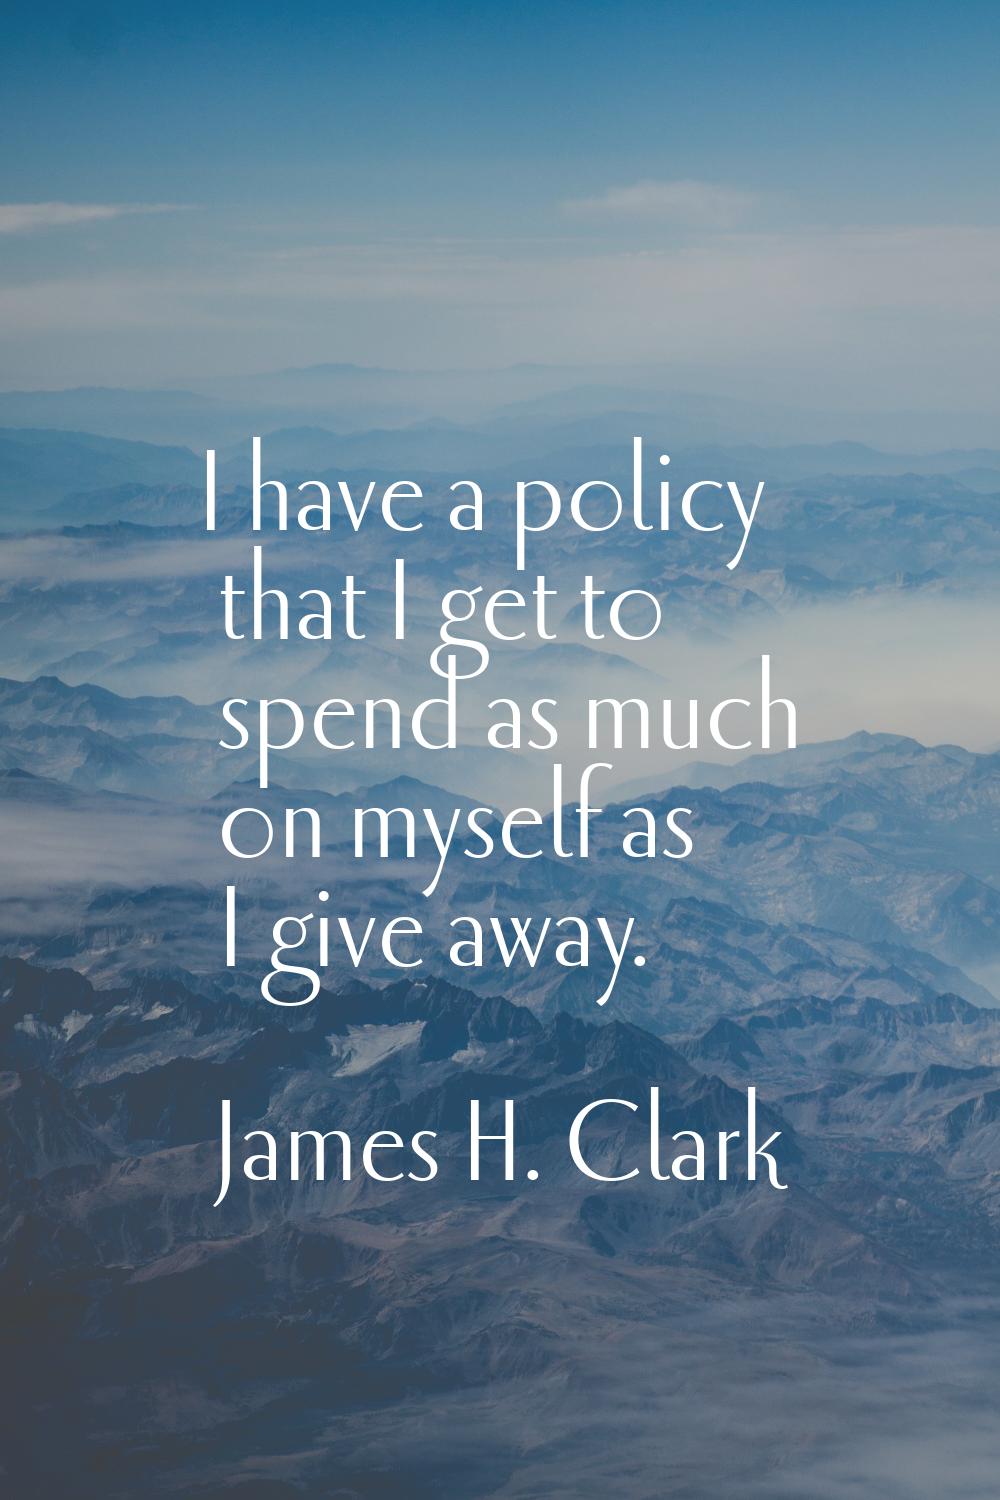 I have a policy that I get to spend as much on myself as I give away.